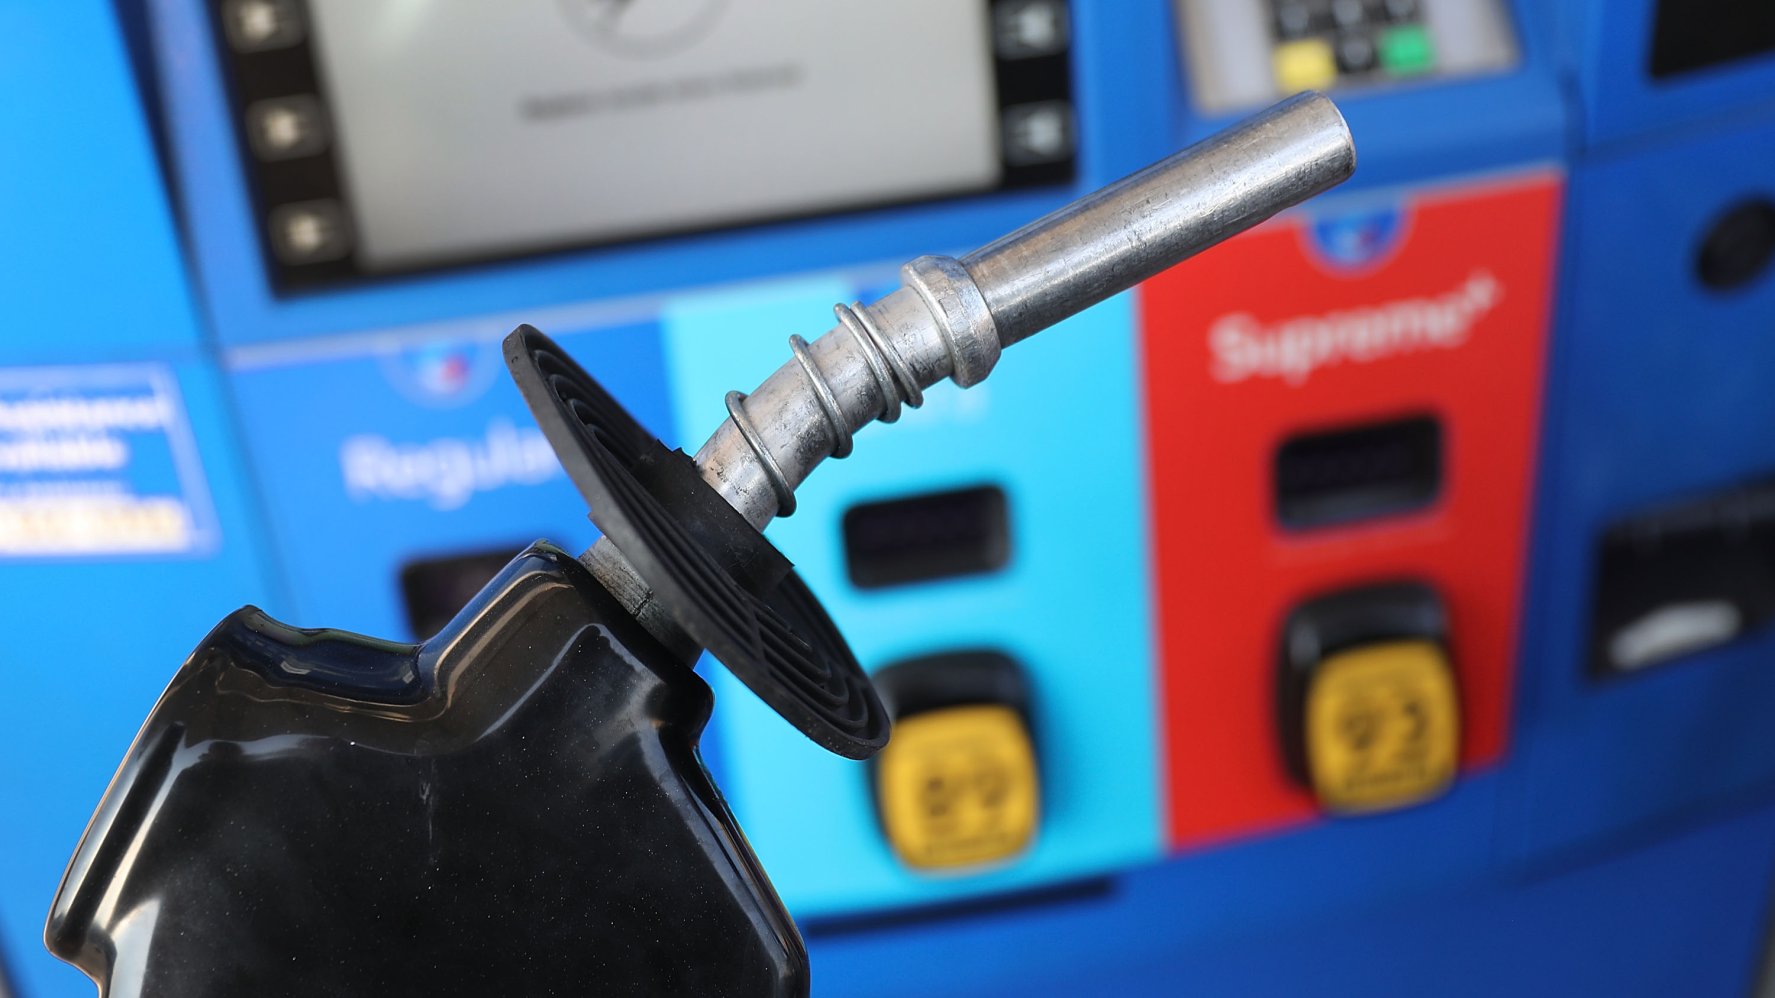 average-socal-gas-prices-remain-high-but-stable-nbc-7-san-diego